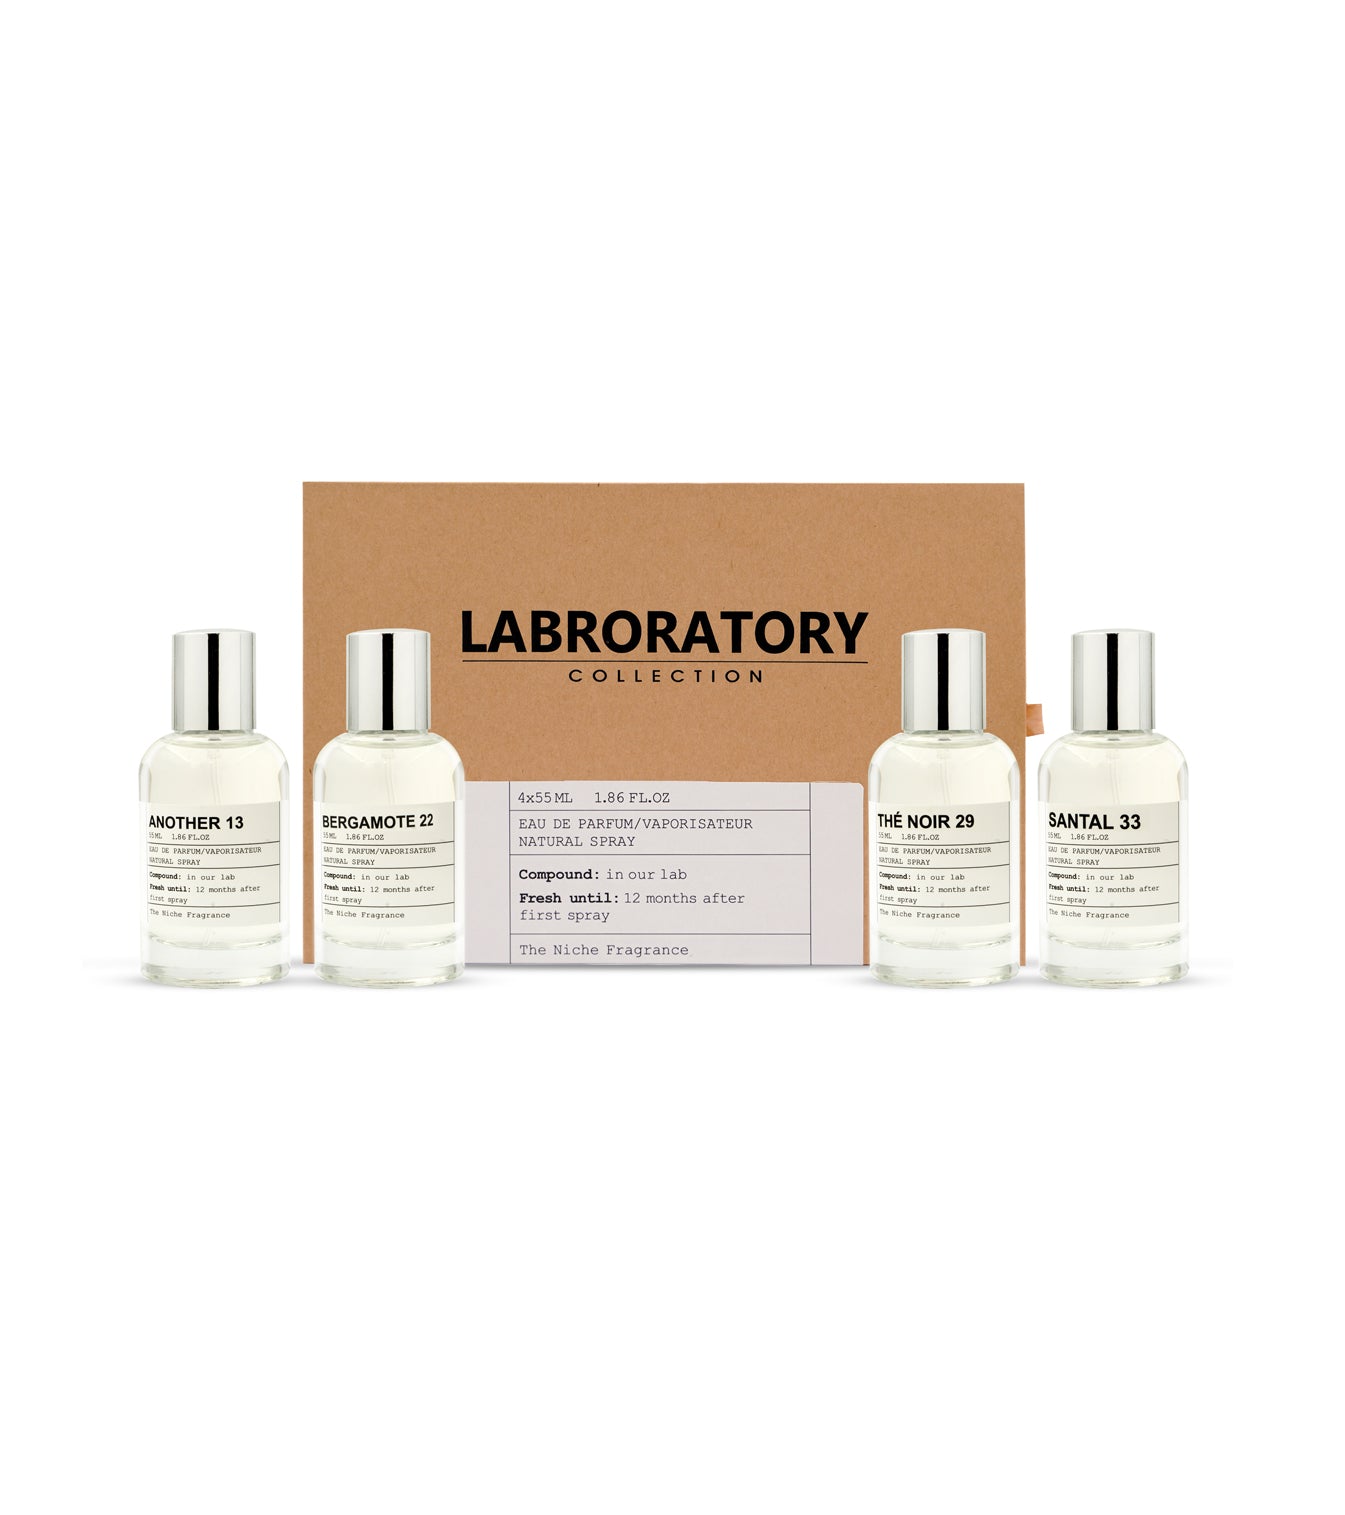 LABRORATORY COLLECTION 55 ML GIFTSET